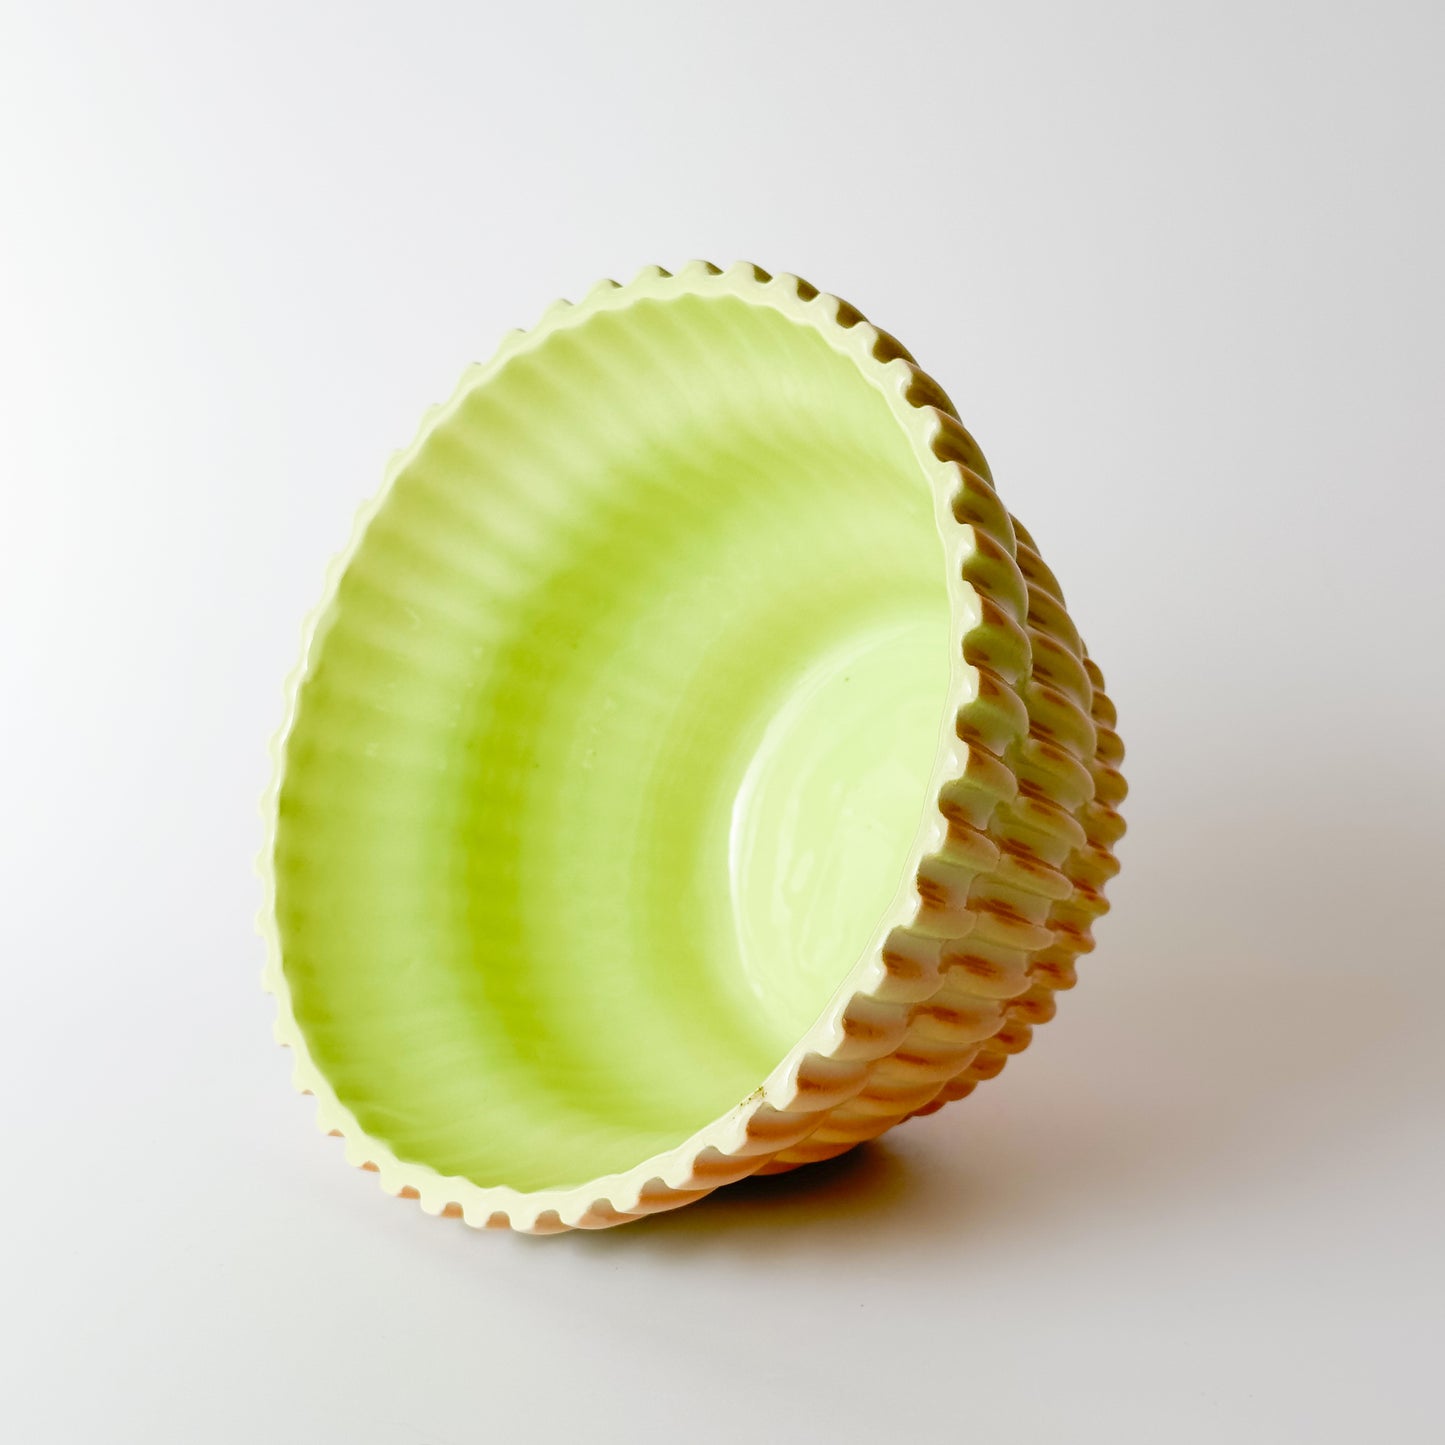 Cereal Bowl in Melon